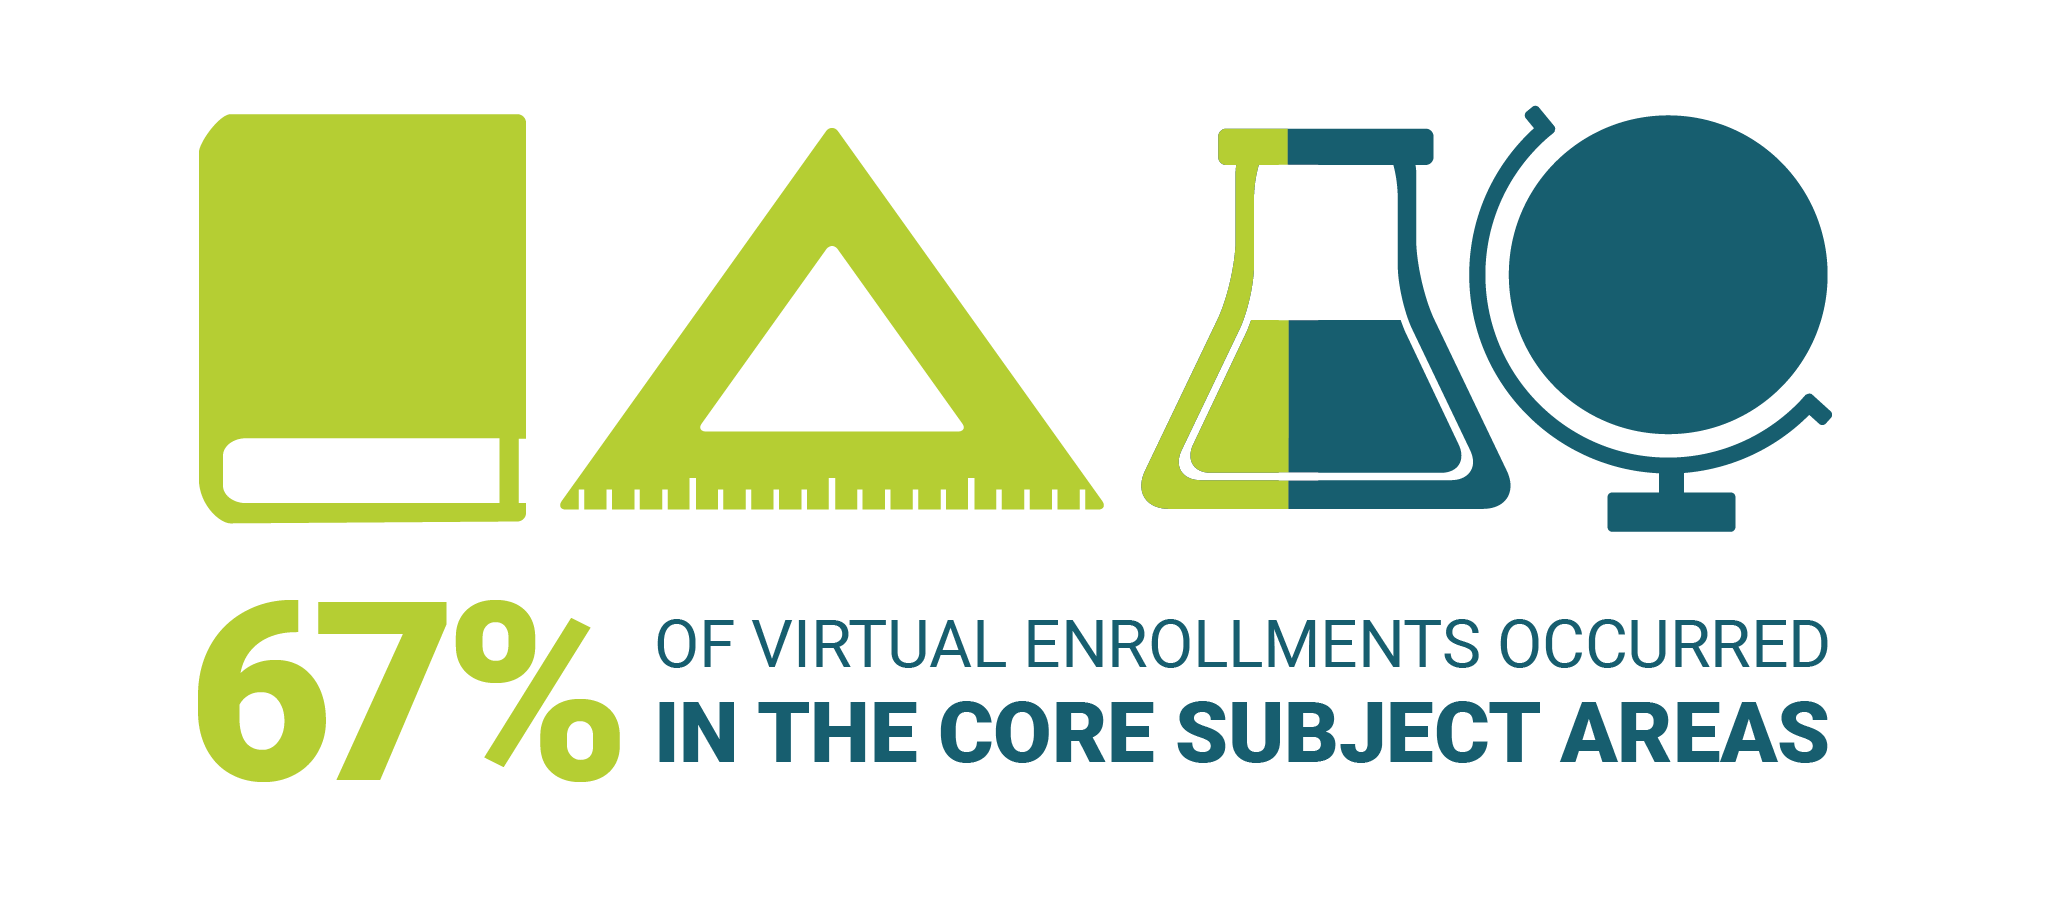 67% of virtual enrollments occurred in the core subject areas